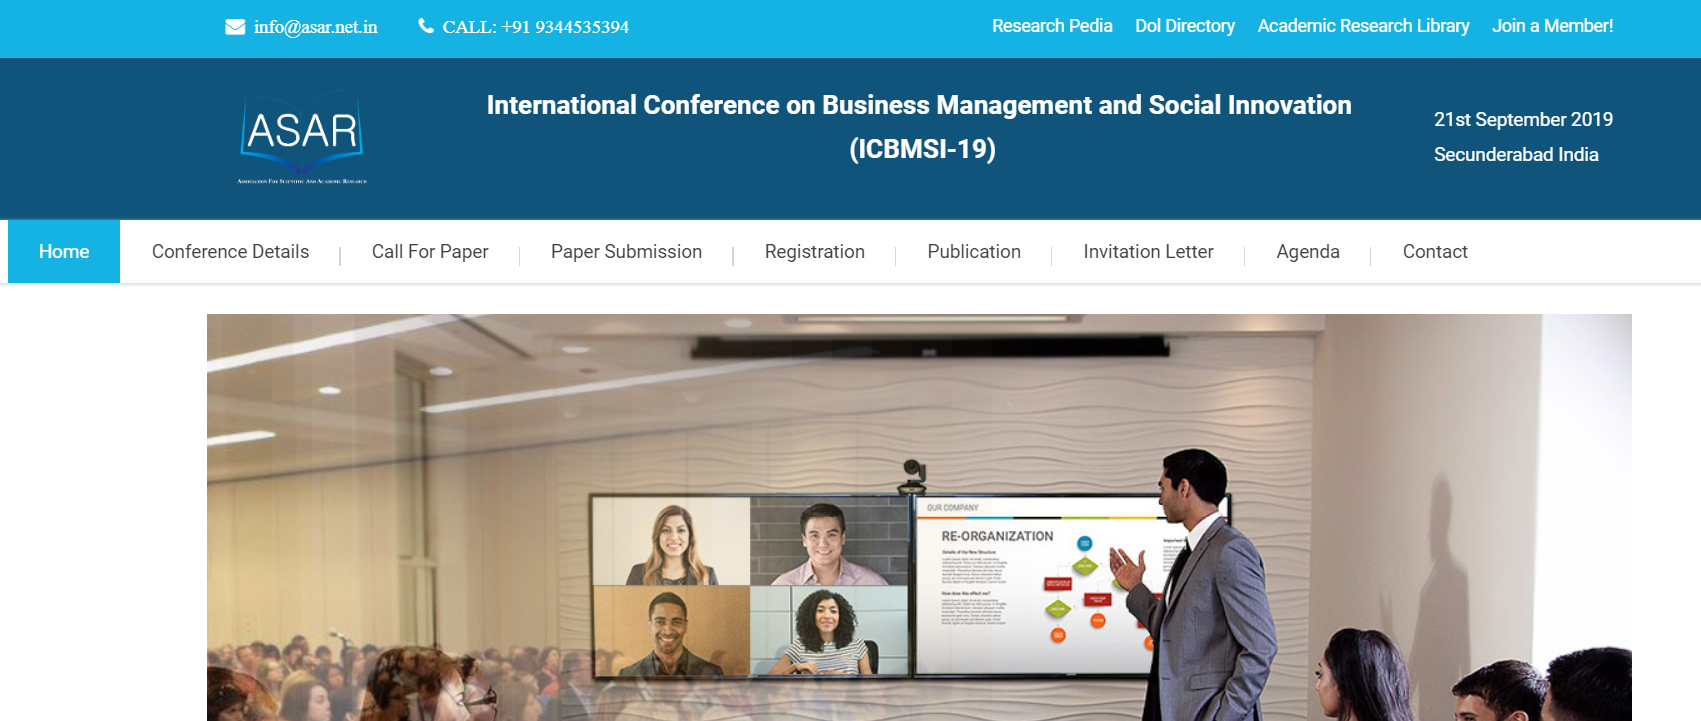 International Conference on Business Management and Social Innovation  (ICBMSI-19), Secunderabad, Telangana, India